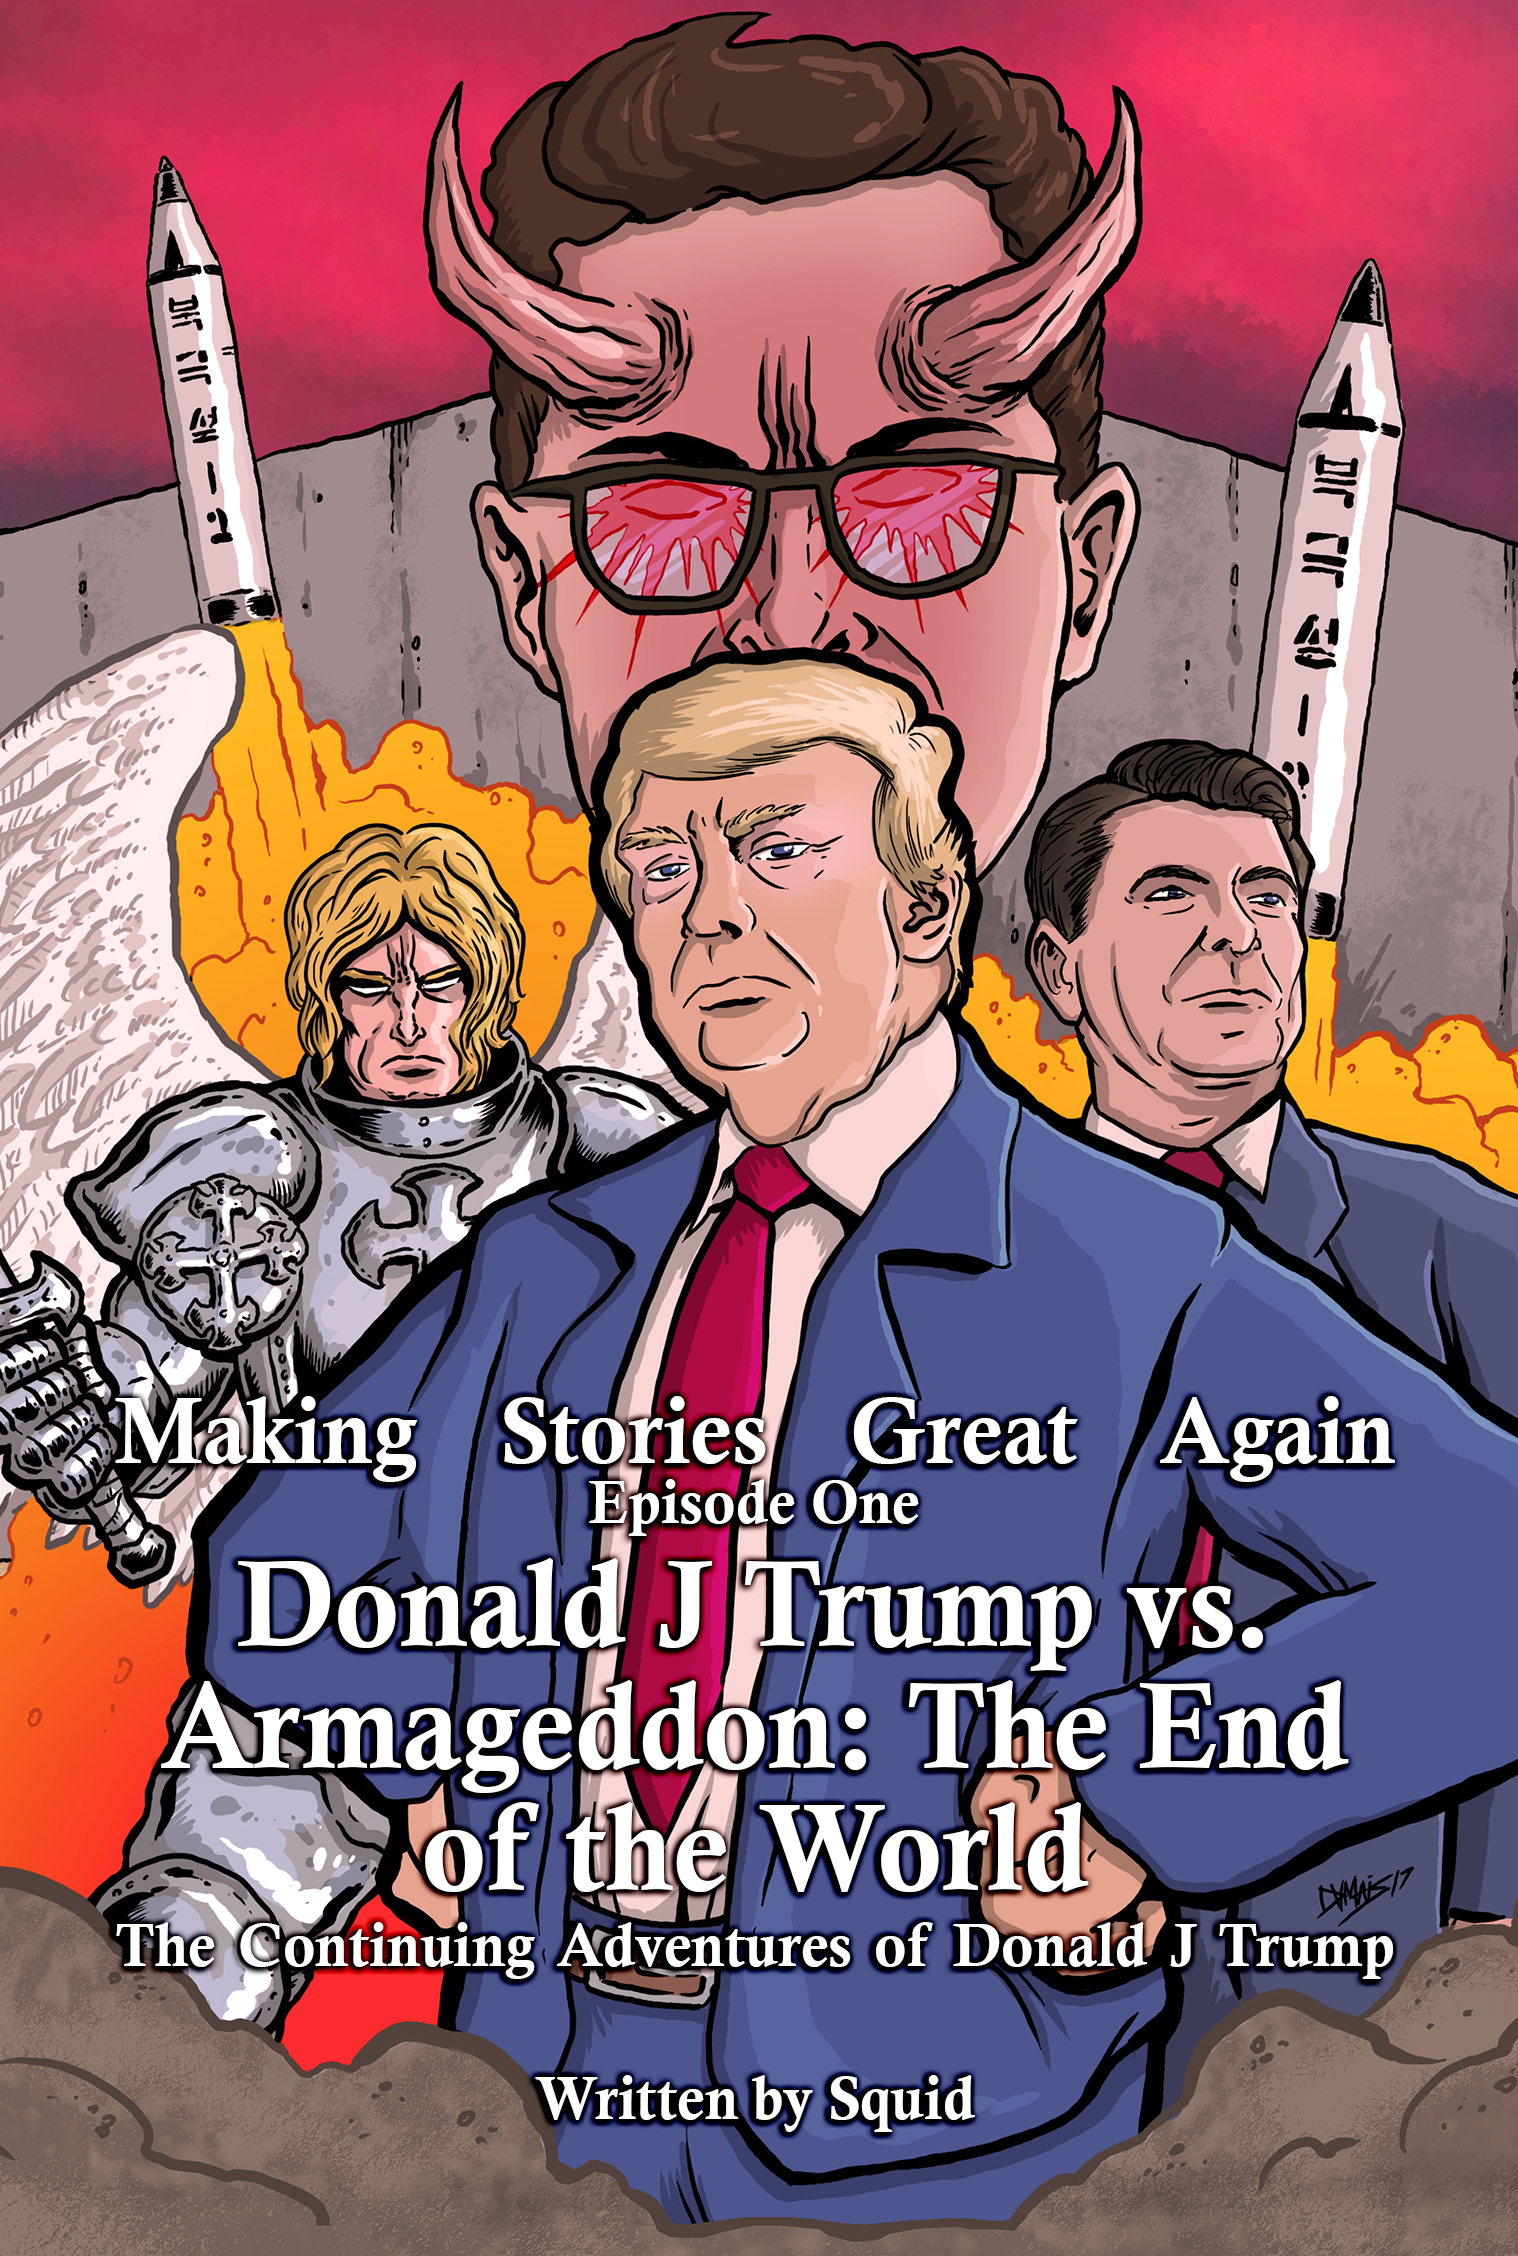 Making Stories Great Again Episode One Donald J Trump vs Armageddon: The End of the World: The Continuing Adventures of Donald J Trump